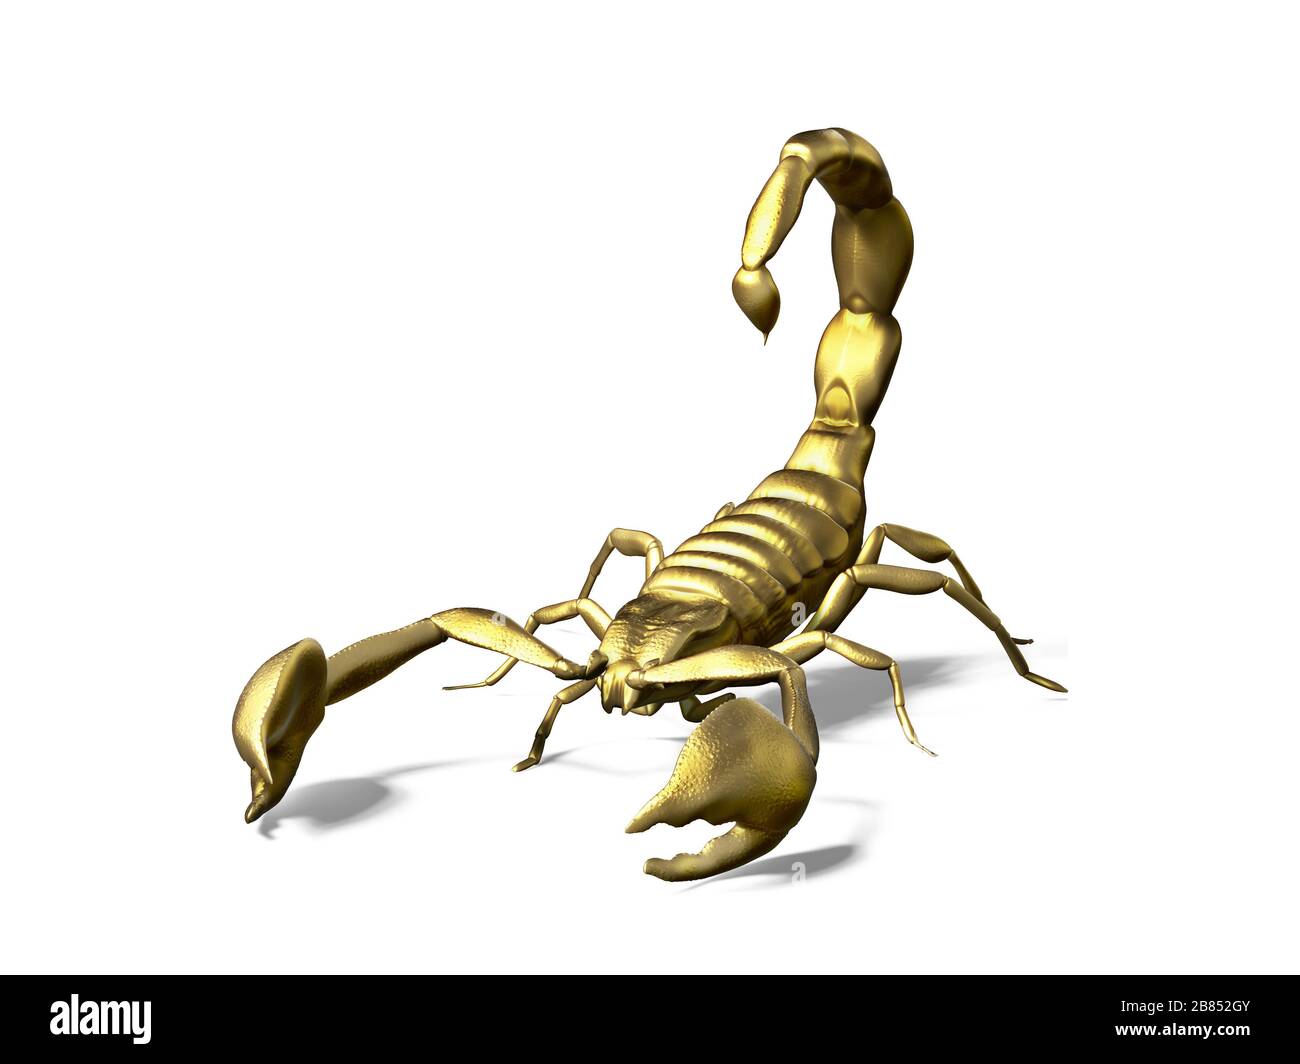 Golden scorpio isolated on white background. Result of rendering 3d model Stock Photo